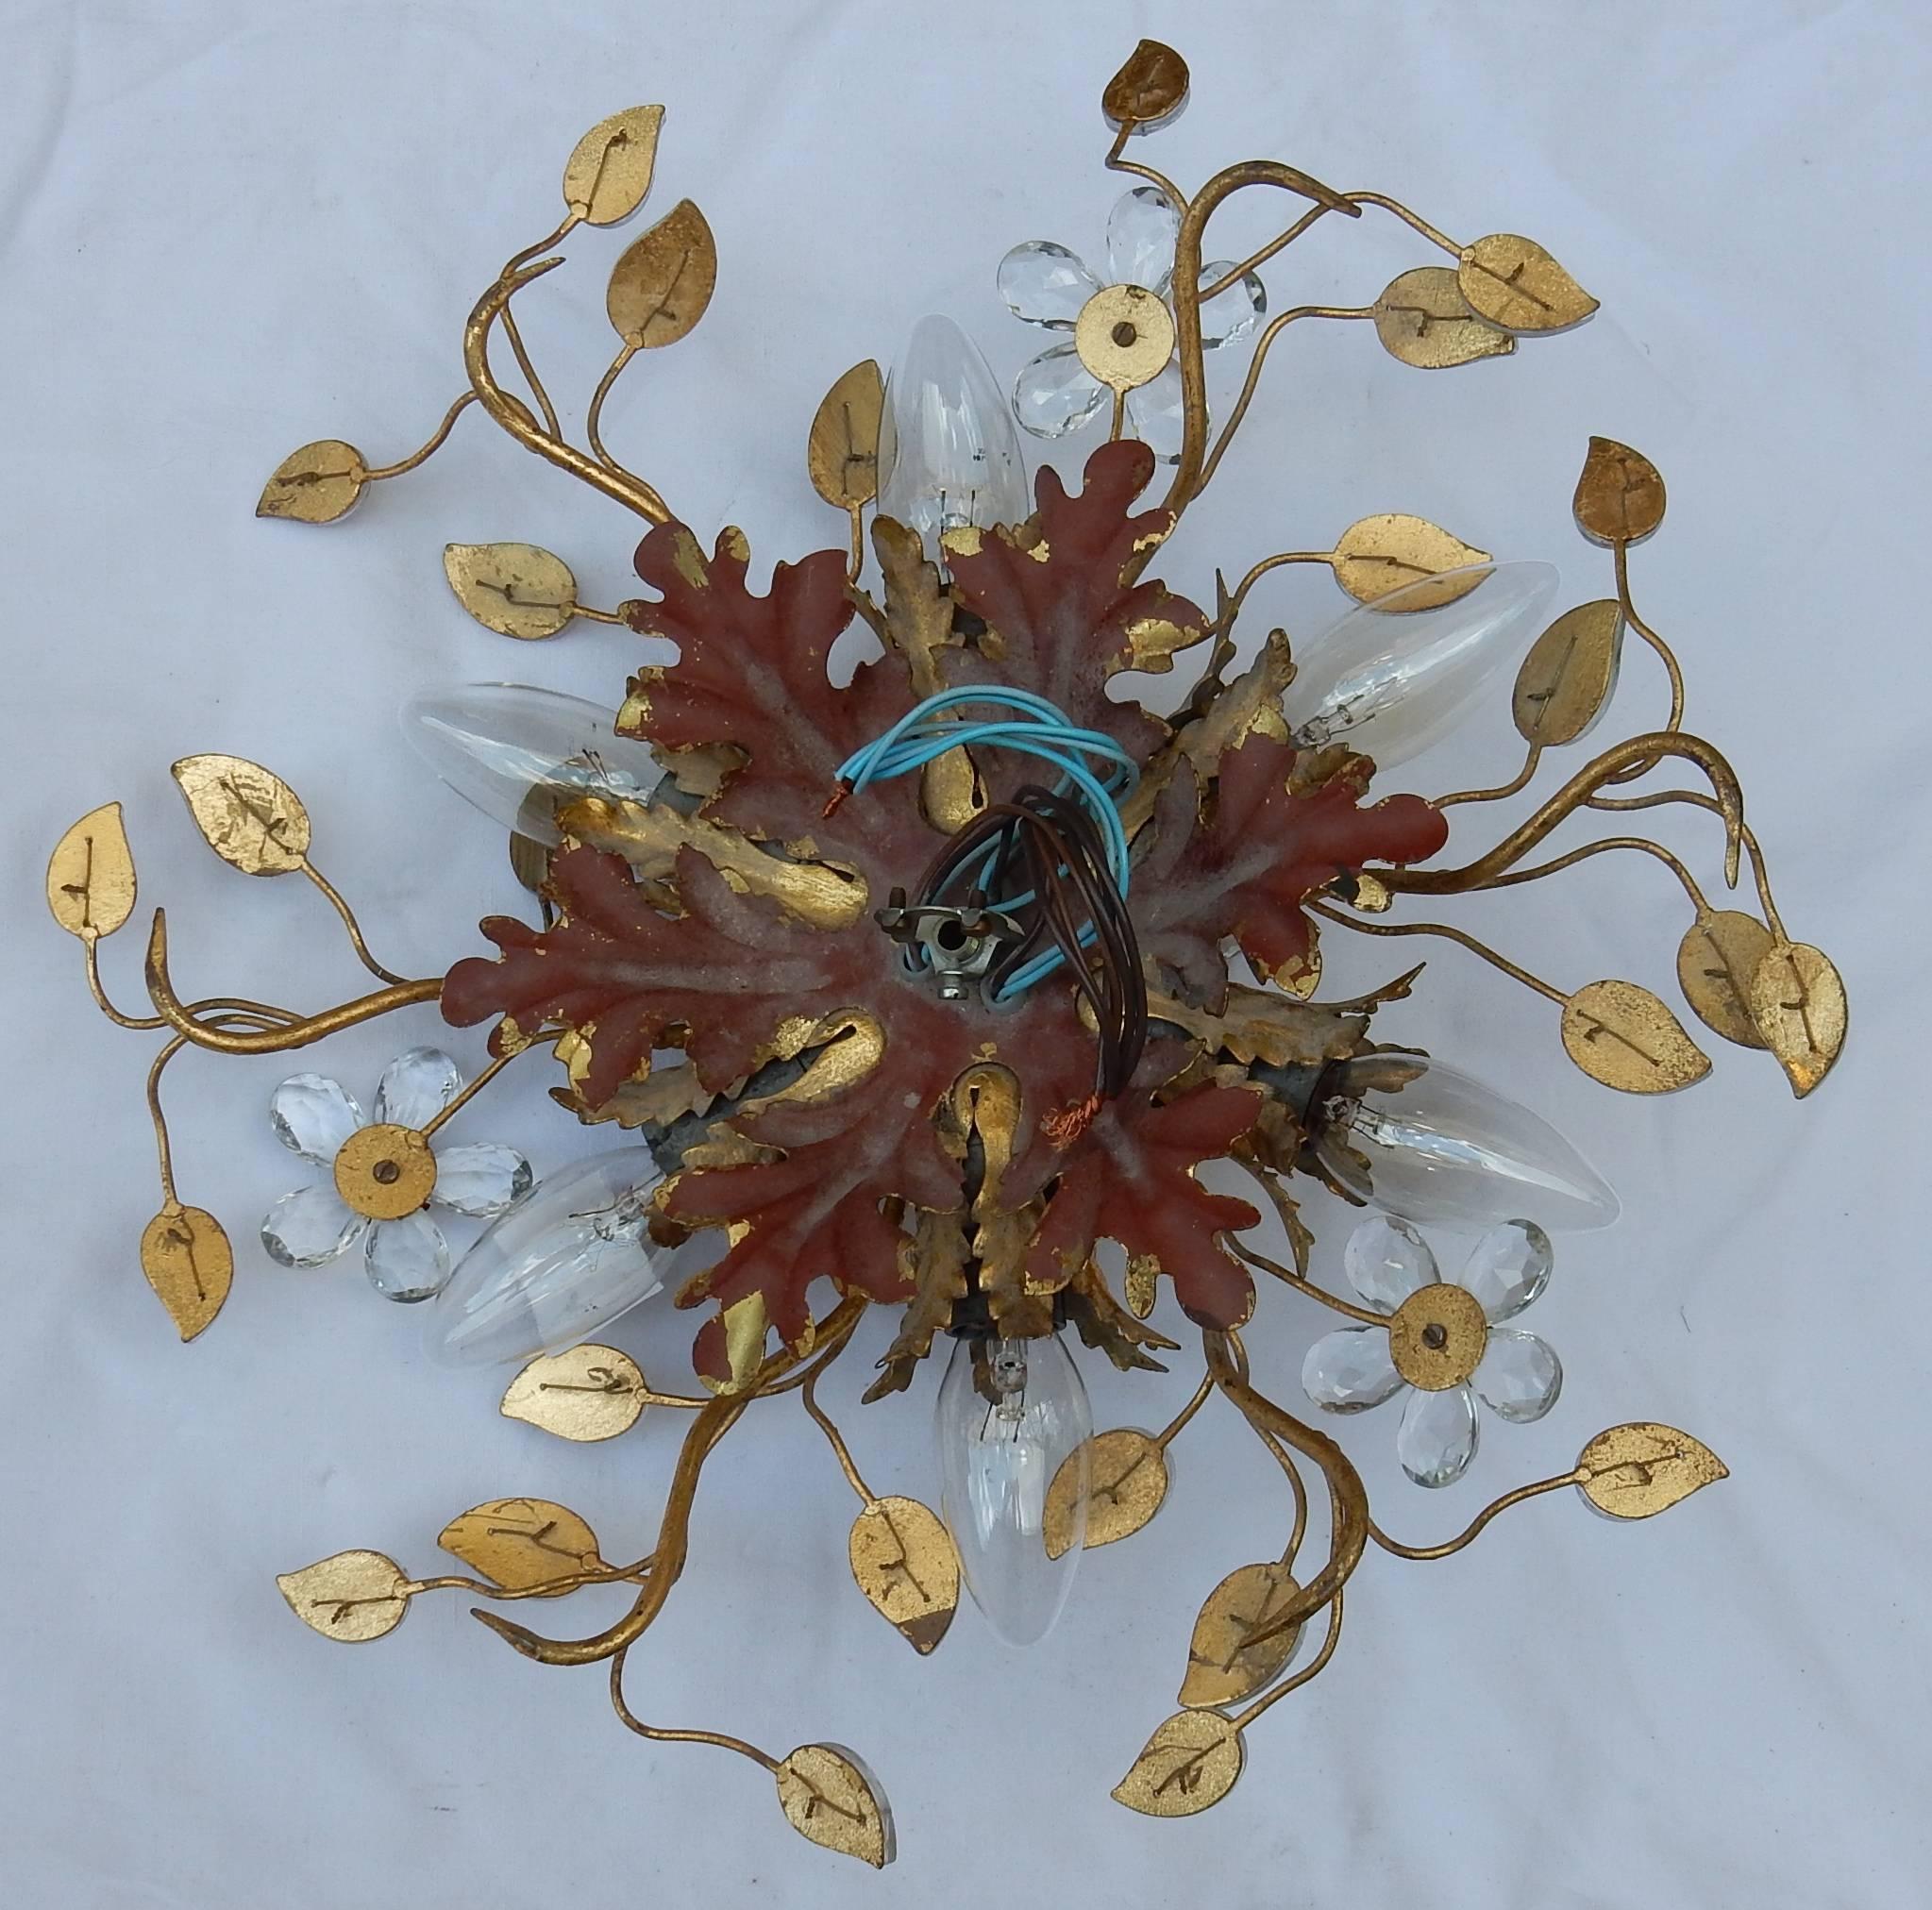 Pair of golden metal ceiling light which can be used in wall lamp, six bulbs, flowers and glass or crystal leaves, circa 1950-1970
Good condition.